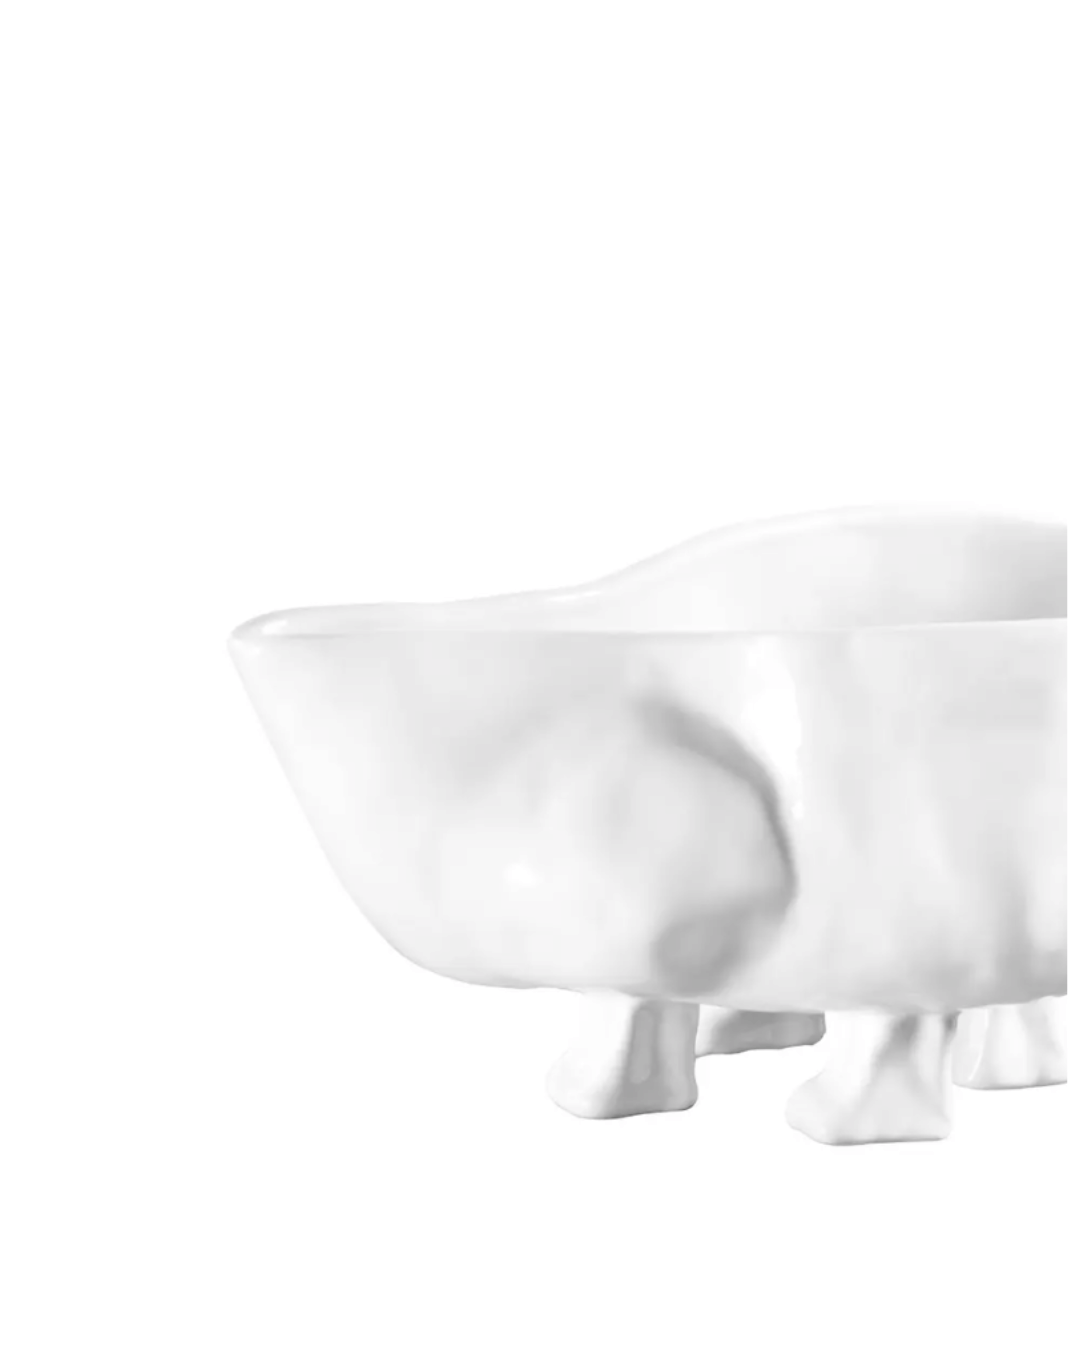 A minimalist ceramic figurine of a hippopotamus, reminiscent of the artistic vibe in Scottsdale, Arizona, depicted in a stylized, abstract form against a white background. The figure is smooth with subtle contours and details. This Gravy Boat No. 151 from Montes Doggett fits perfectly with any modern home decor.